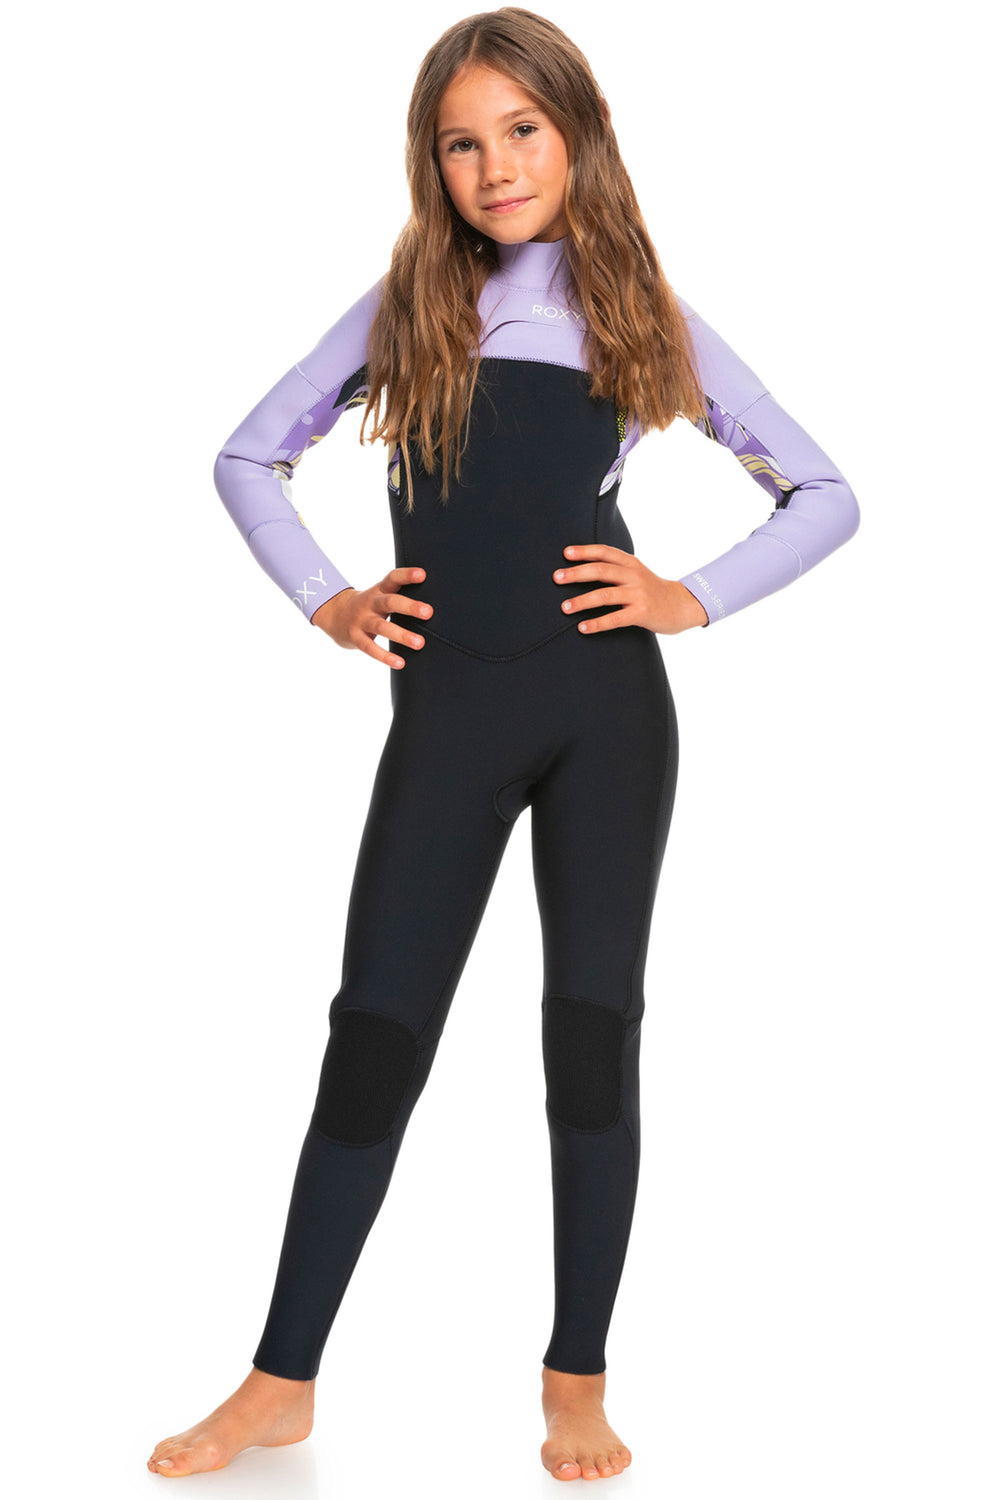 Pukas-Surf-Shop-Roxy-Wetsuit-4-3mm-Swell-Series-Chest-Zip-Wetsuit-for-Girls-kvj6